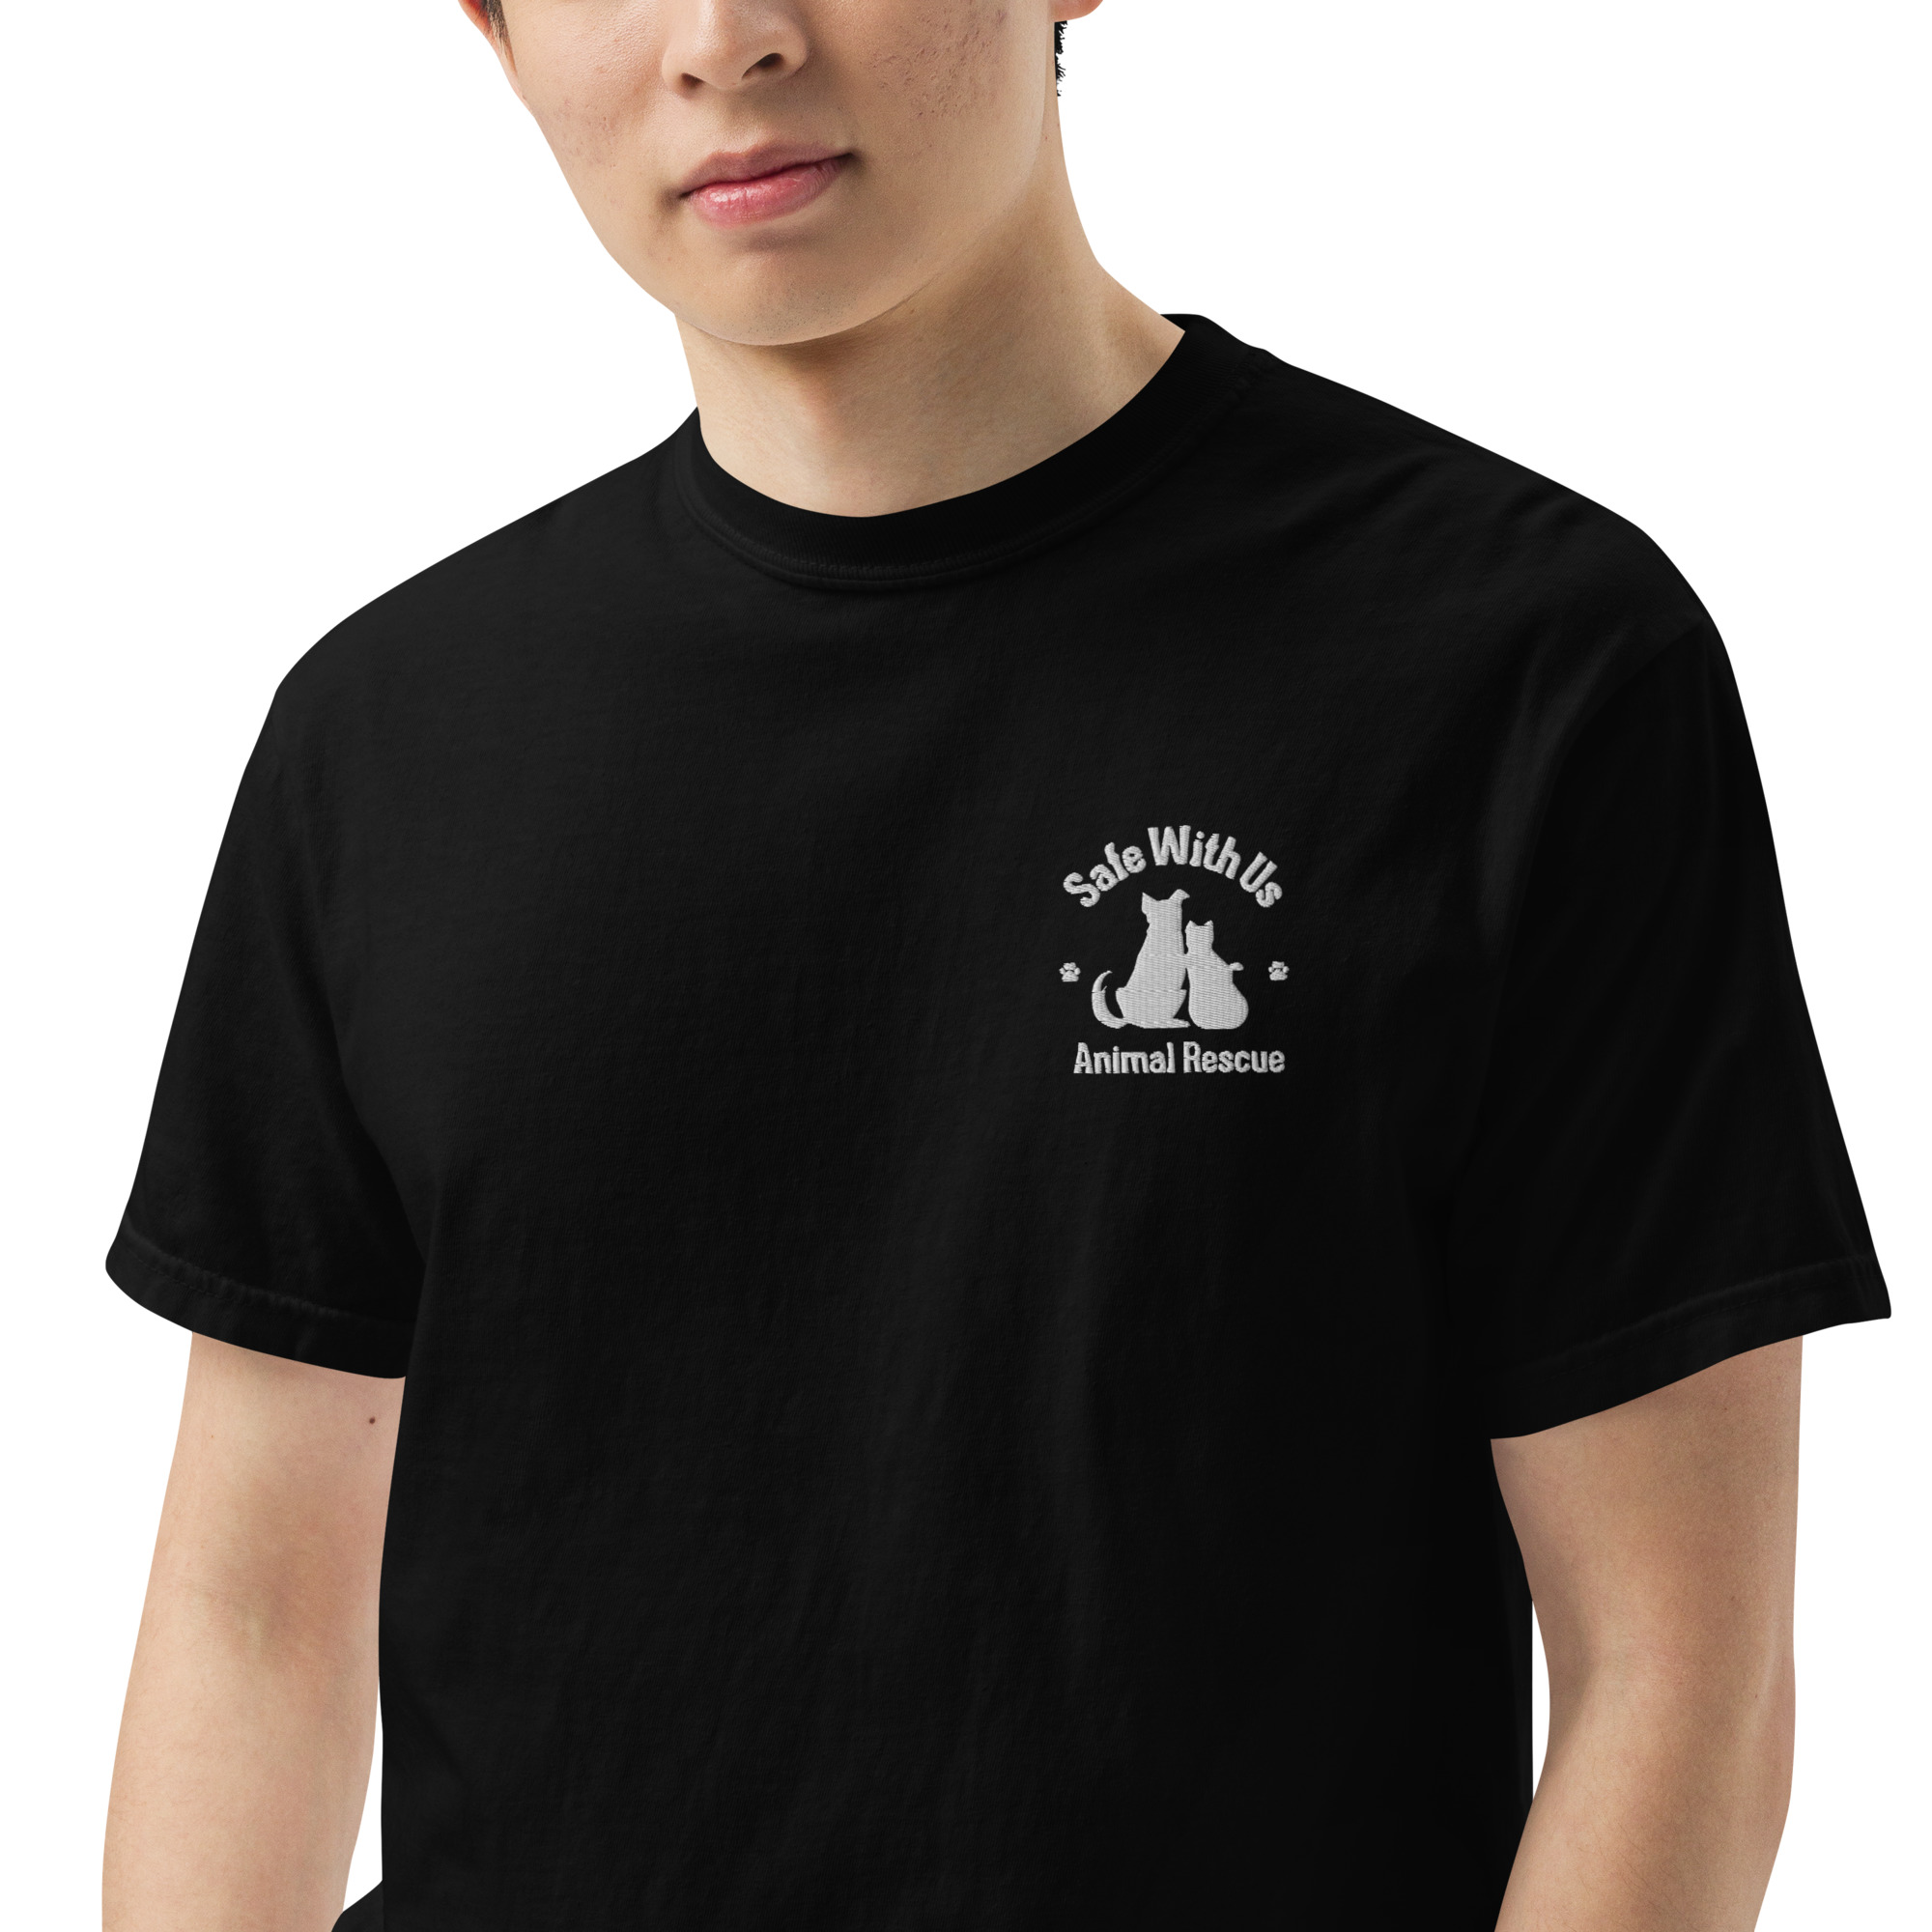 mens-garment-dyed-heavyweight-t-shirt-black-zoomed-in-3-641520bf84398.jpg